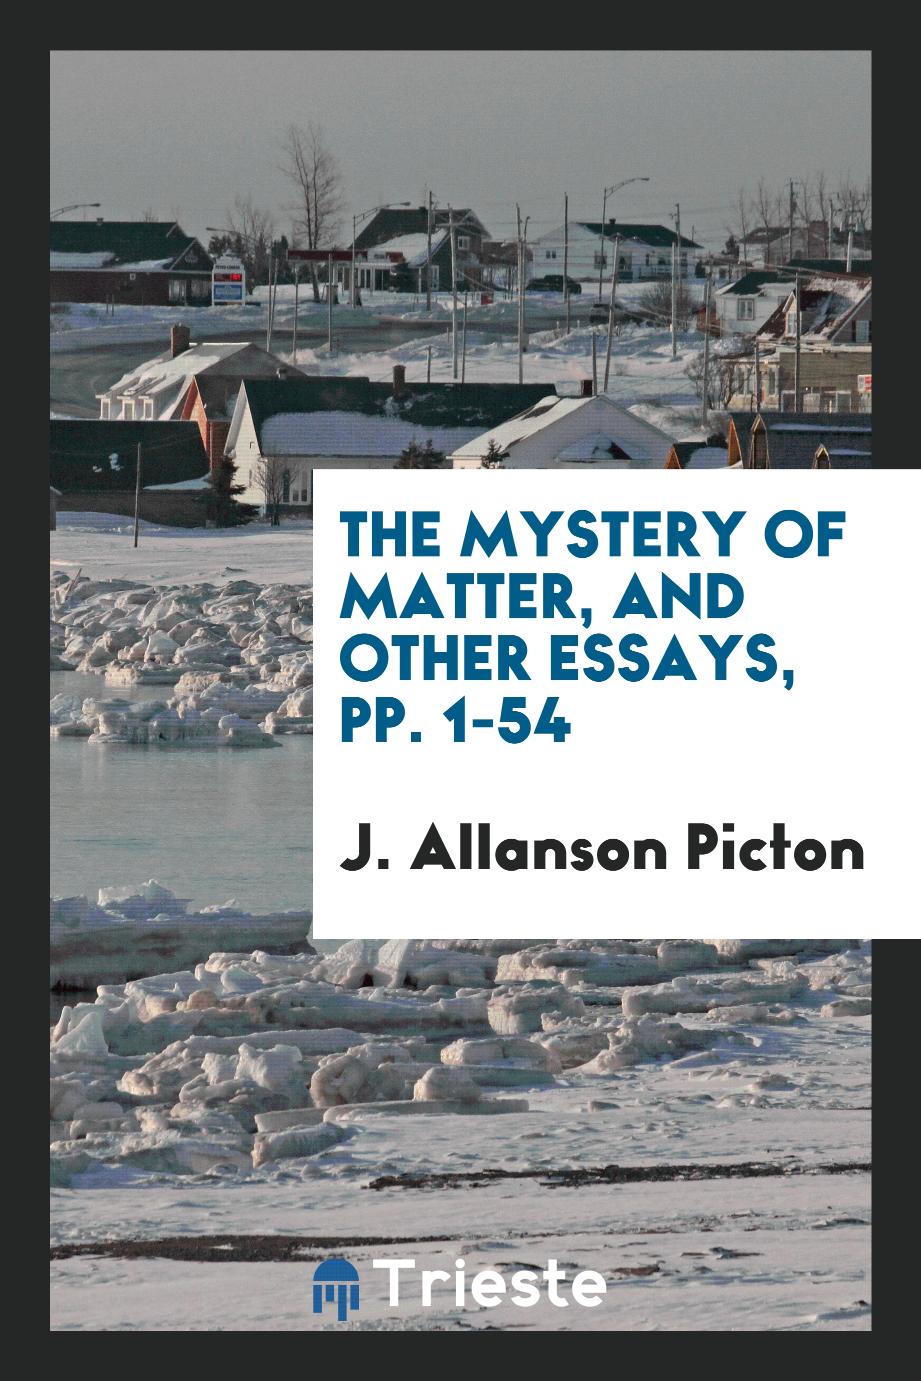 The Mystery of Matter, and Other Essays, pp. 1-54